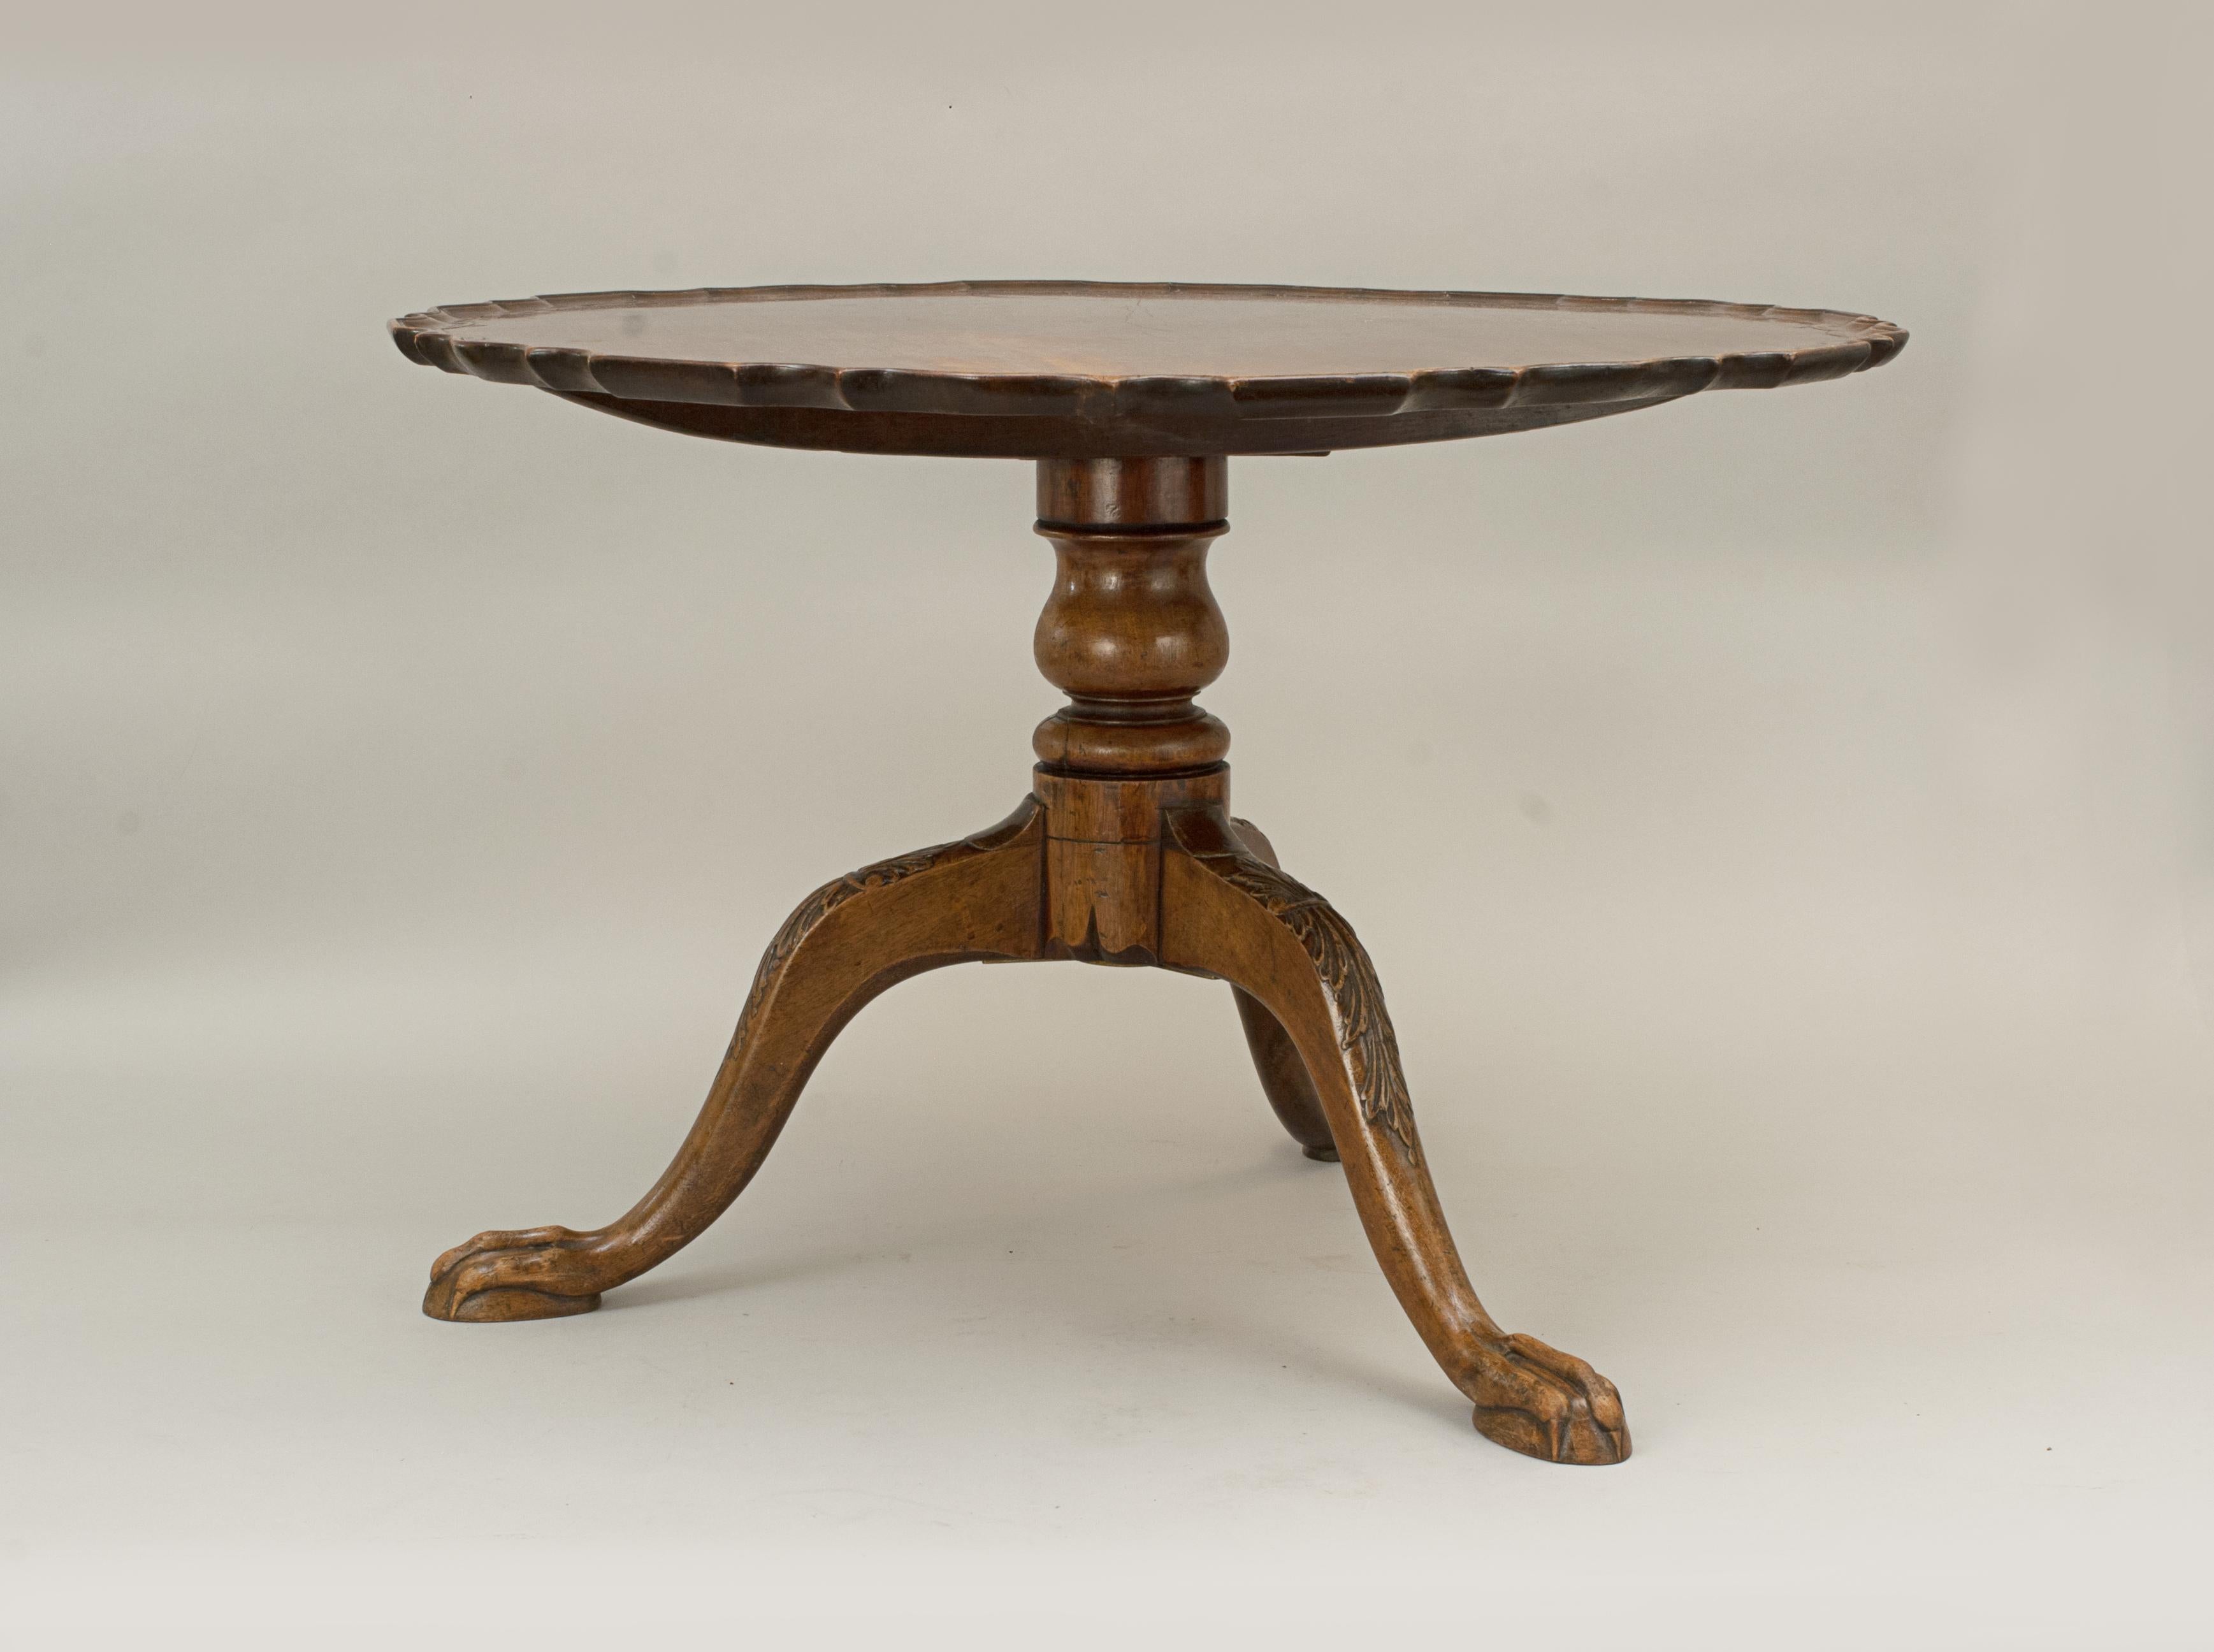 British Mahogany Coffee, Pie Crust Tripod Table with Tilt-Top Action